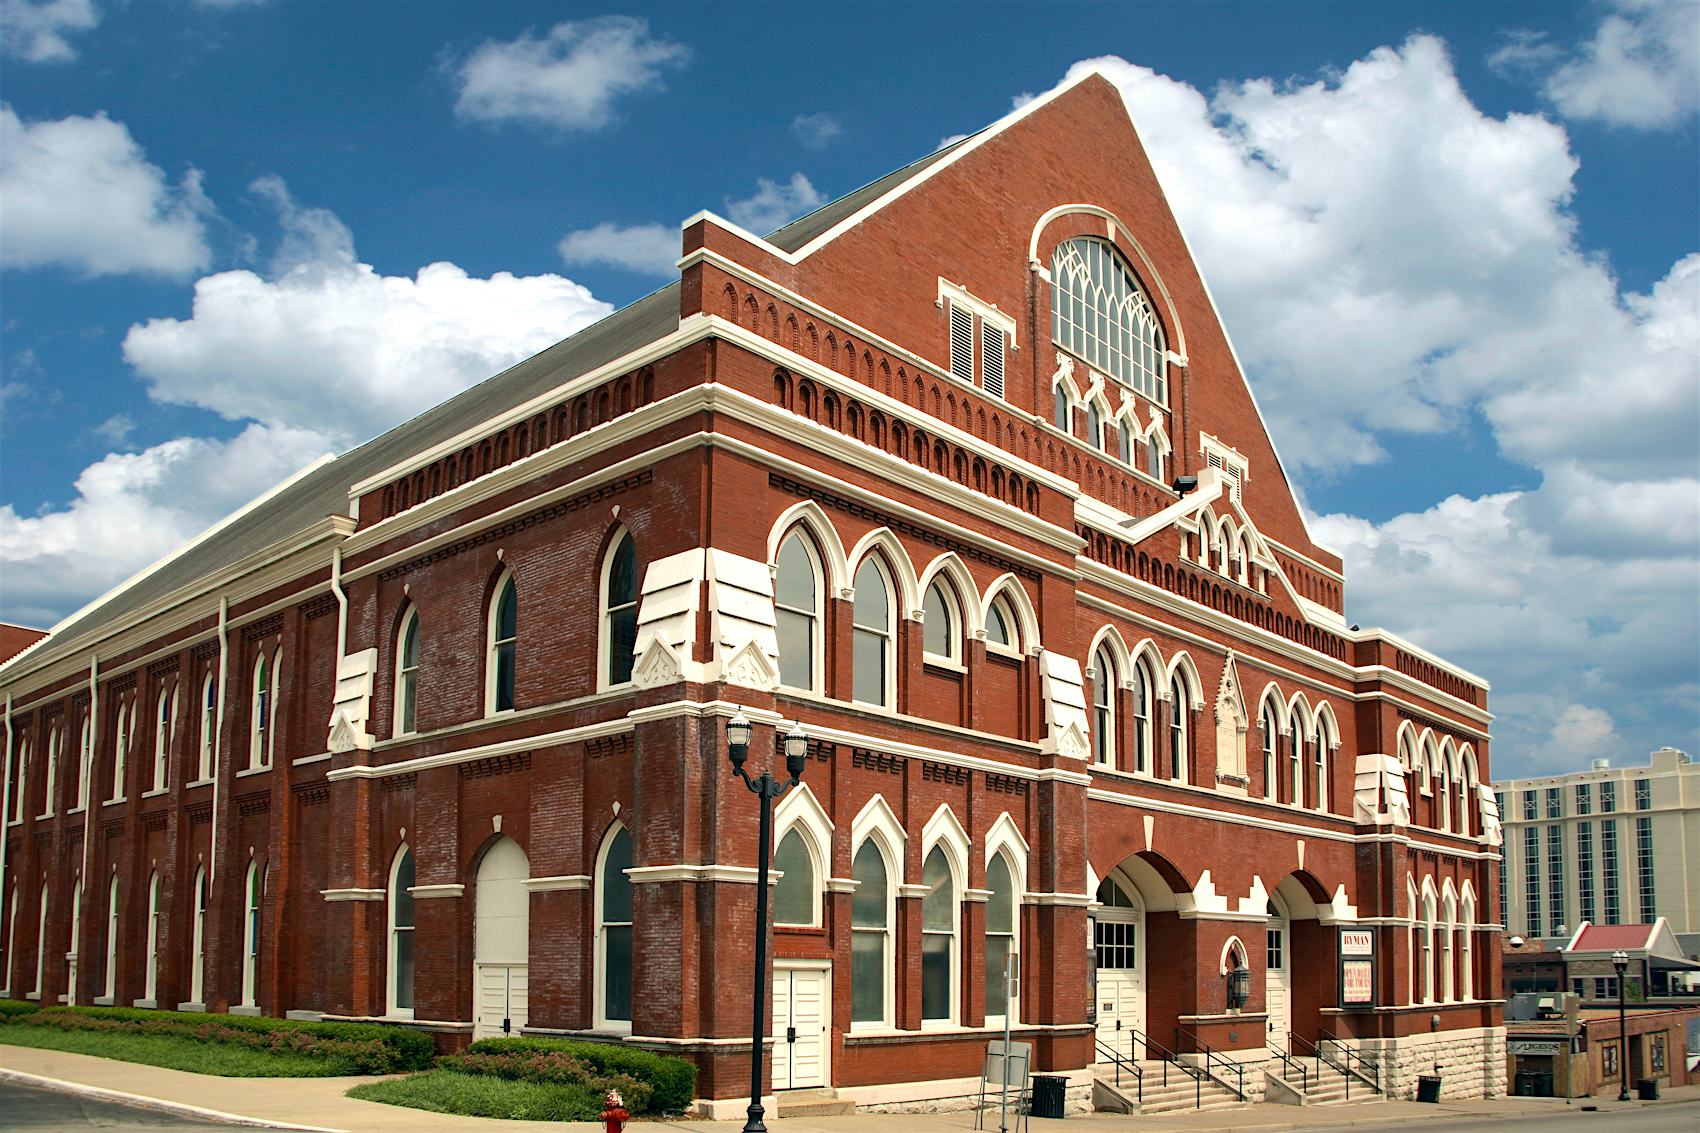 Image of The Ryman Auditorium in Nashville, Tennessee